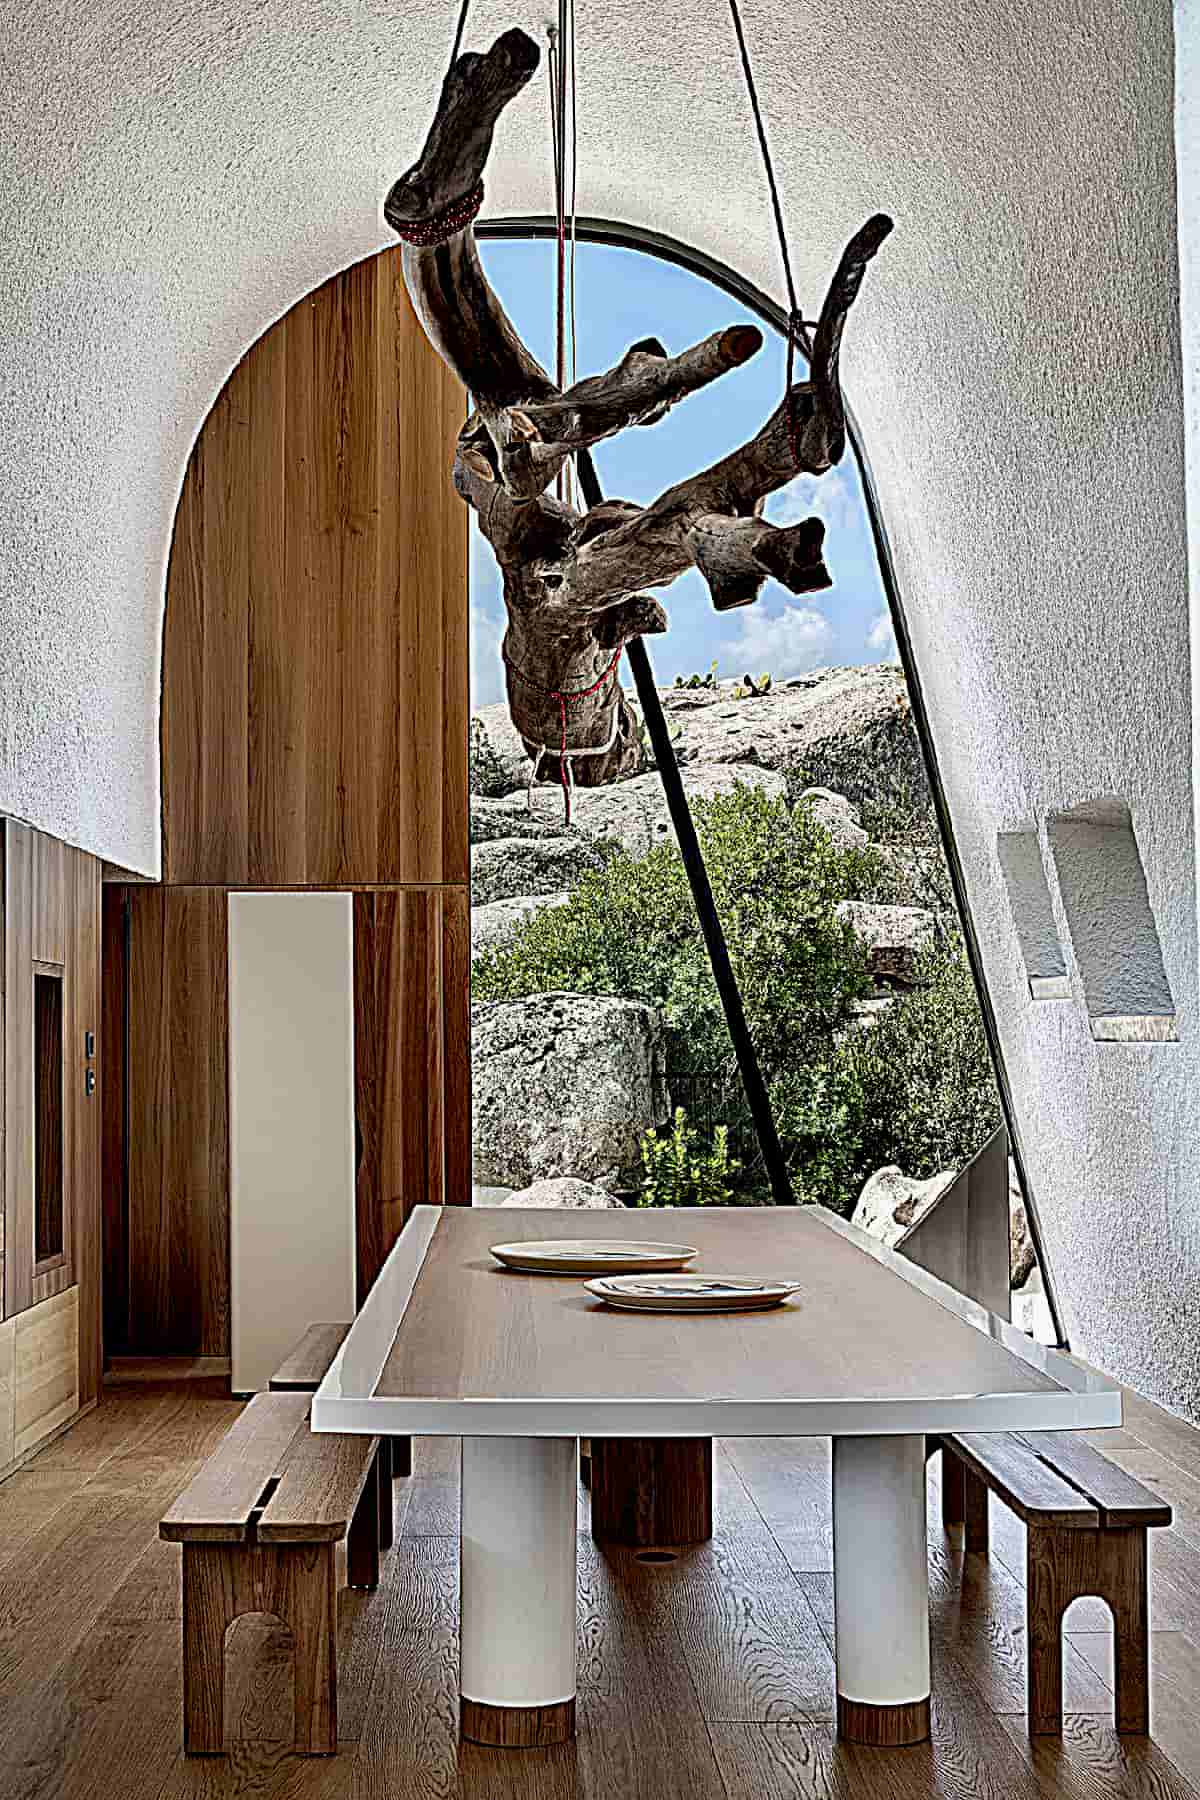 Sardinia, Italy is the Home to some of the Most Iconic Vacation Villas and Resorts ─ House in Sardinia Stera Architectures Tiziano Canu